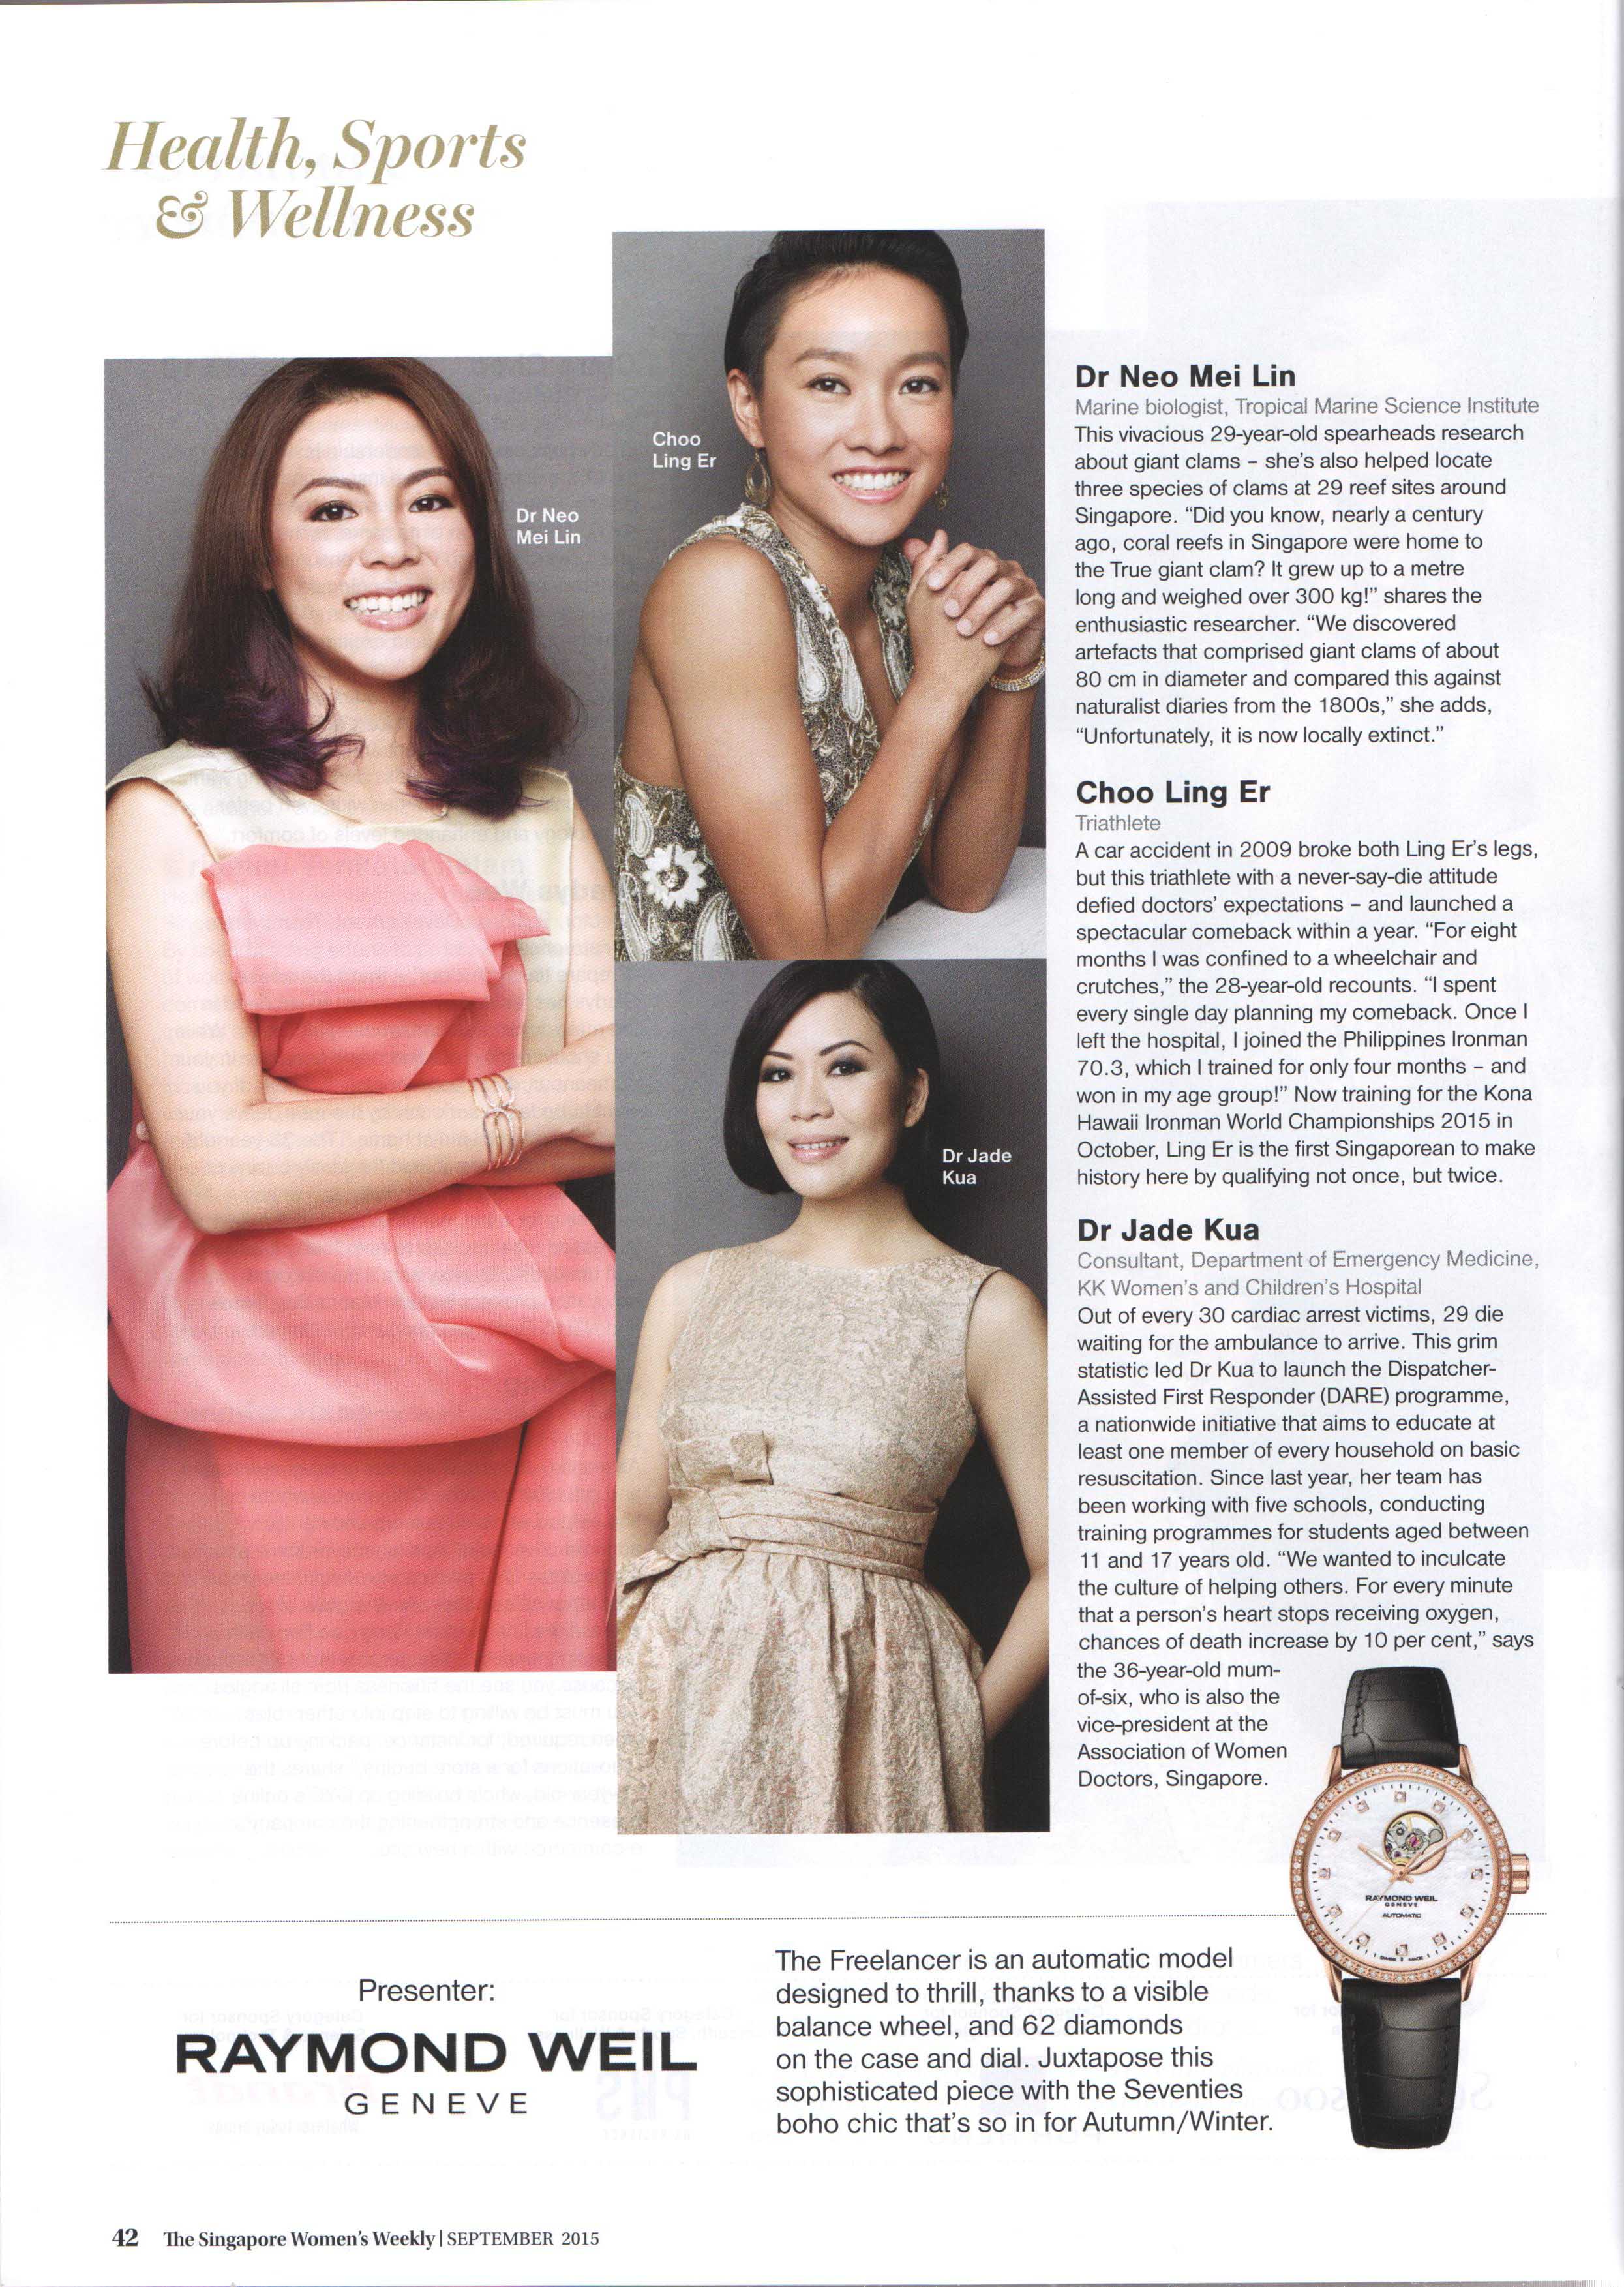 Career] The Singapore's Women Weekly – Great Women of Our Time 2015 –  Nomination for the “Sports, Health and Wellness” category – Mei Lin Neo